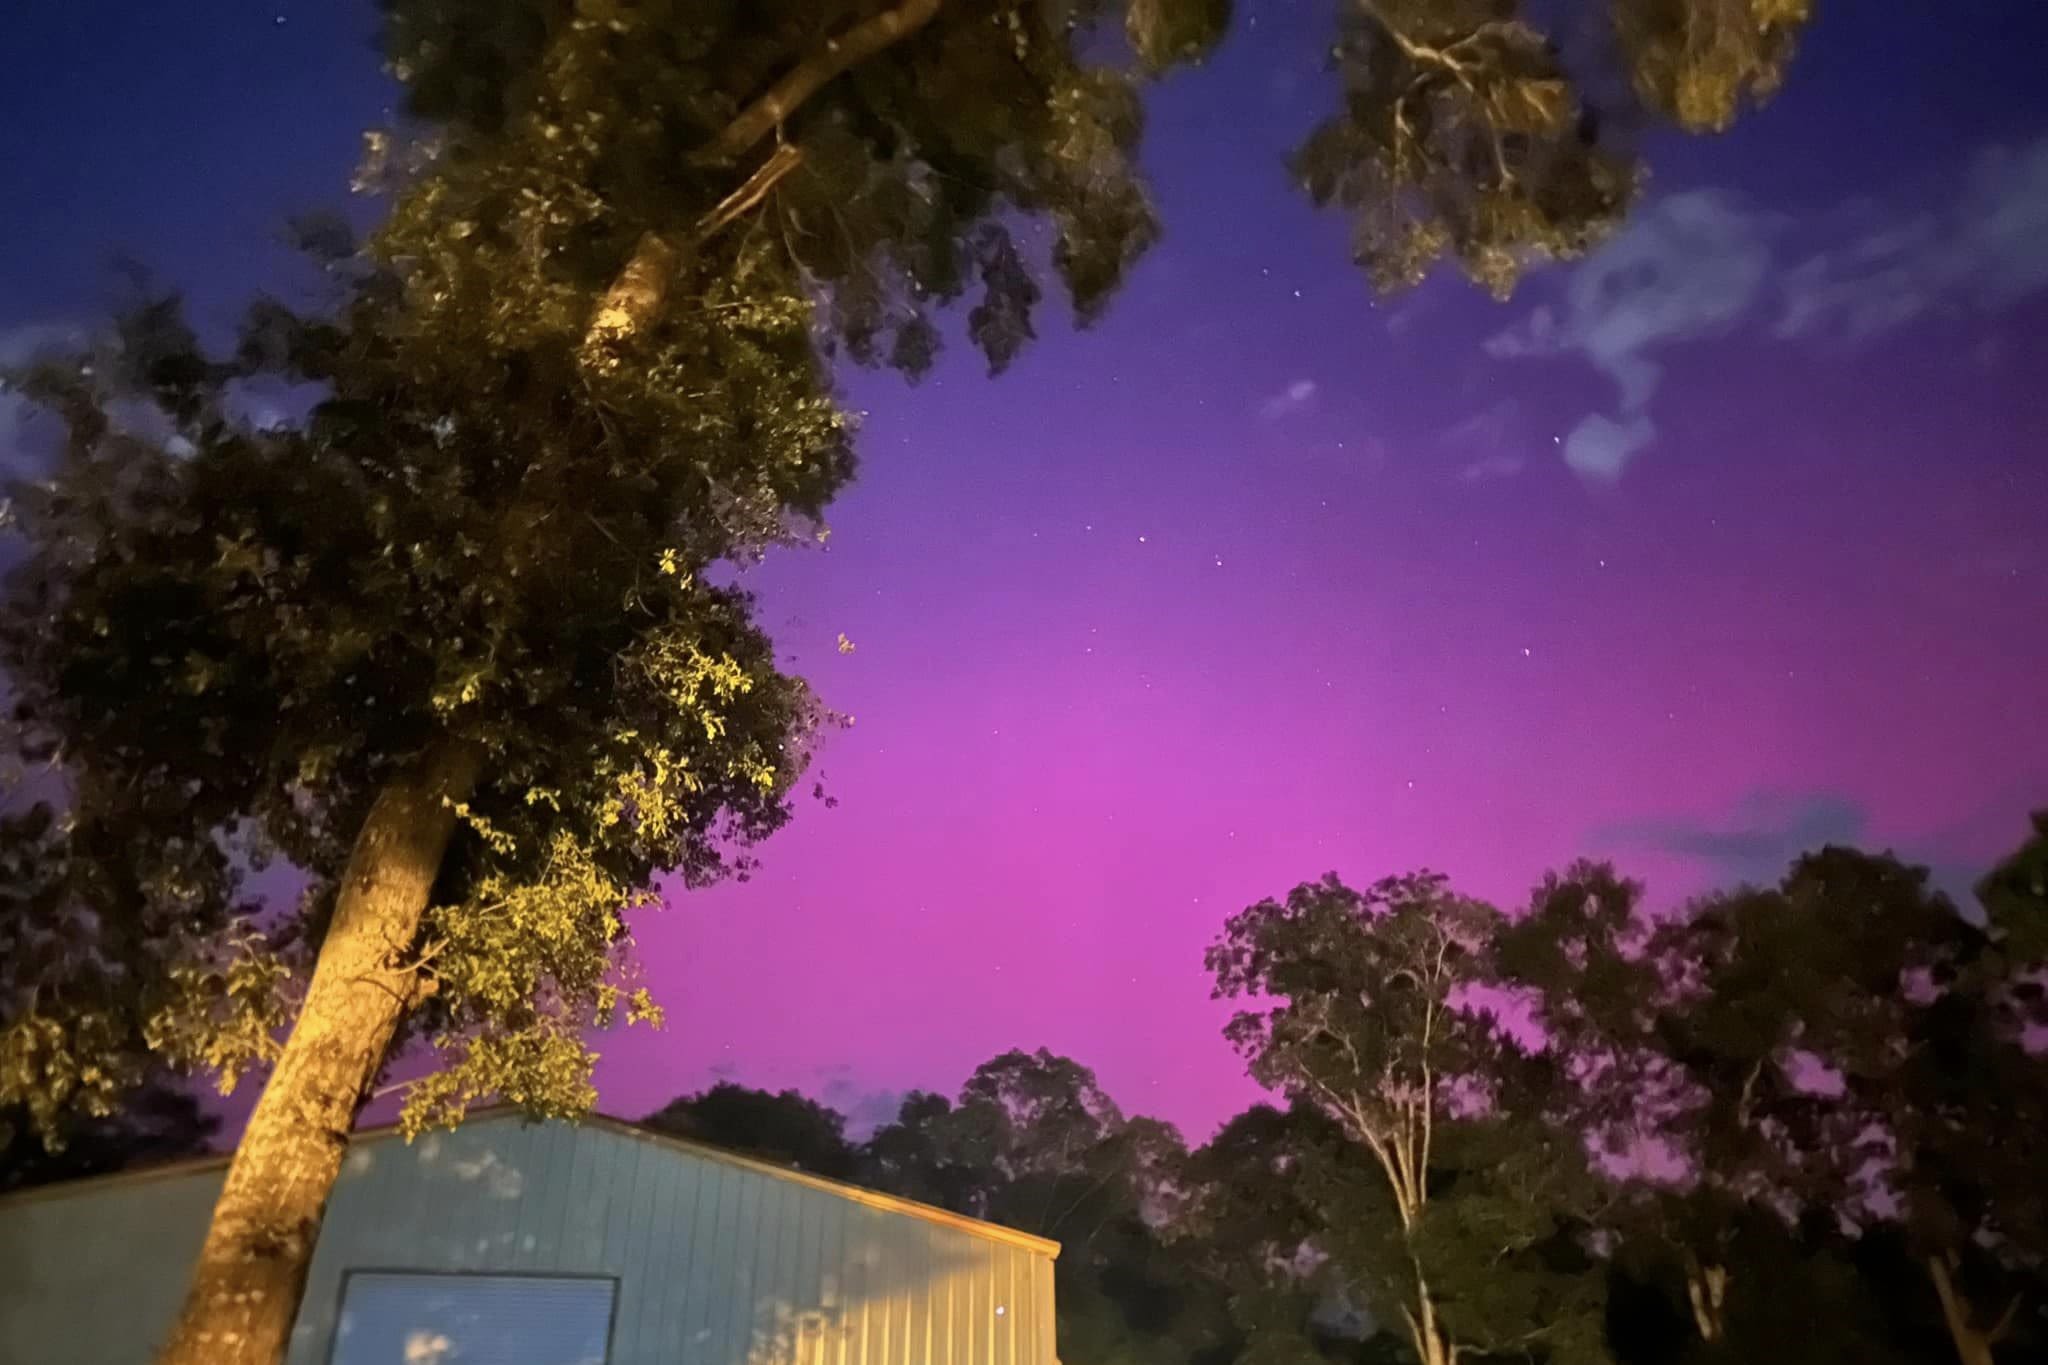 Houston area catches a rare glimpse of the northern lights